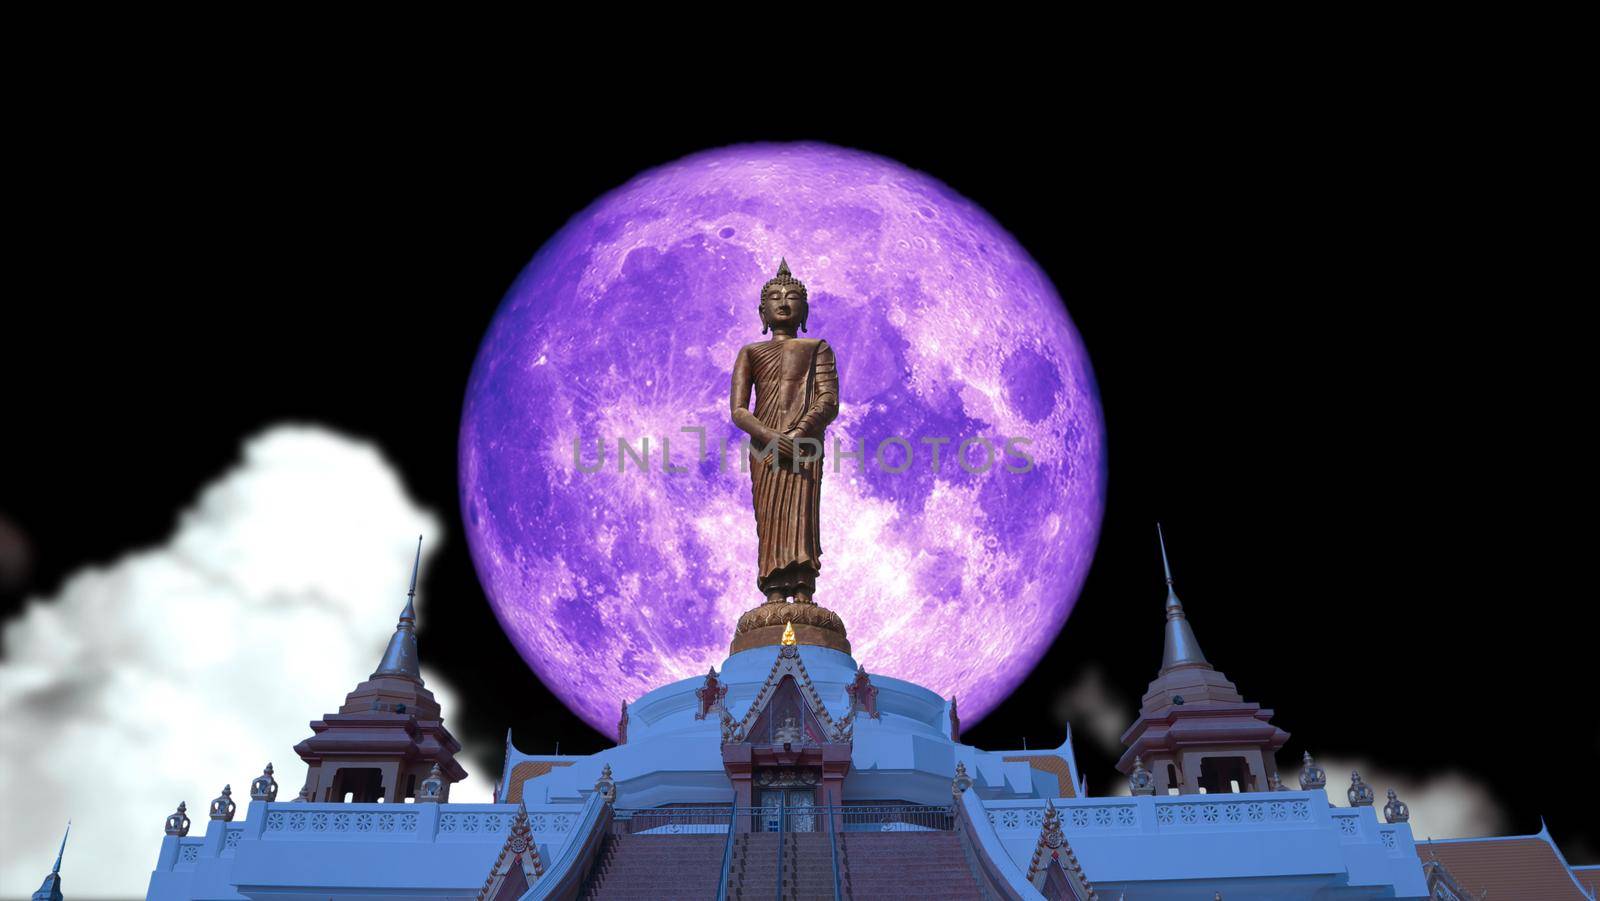 super full pink moon and Buddha looking seven day style on the night sky, Elements of this image furnished by NASA